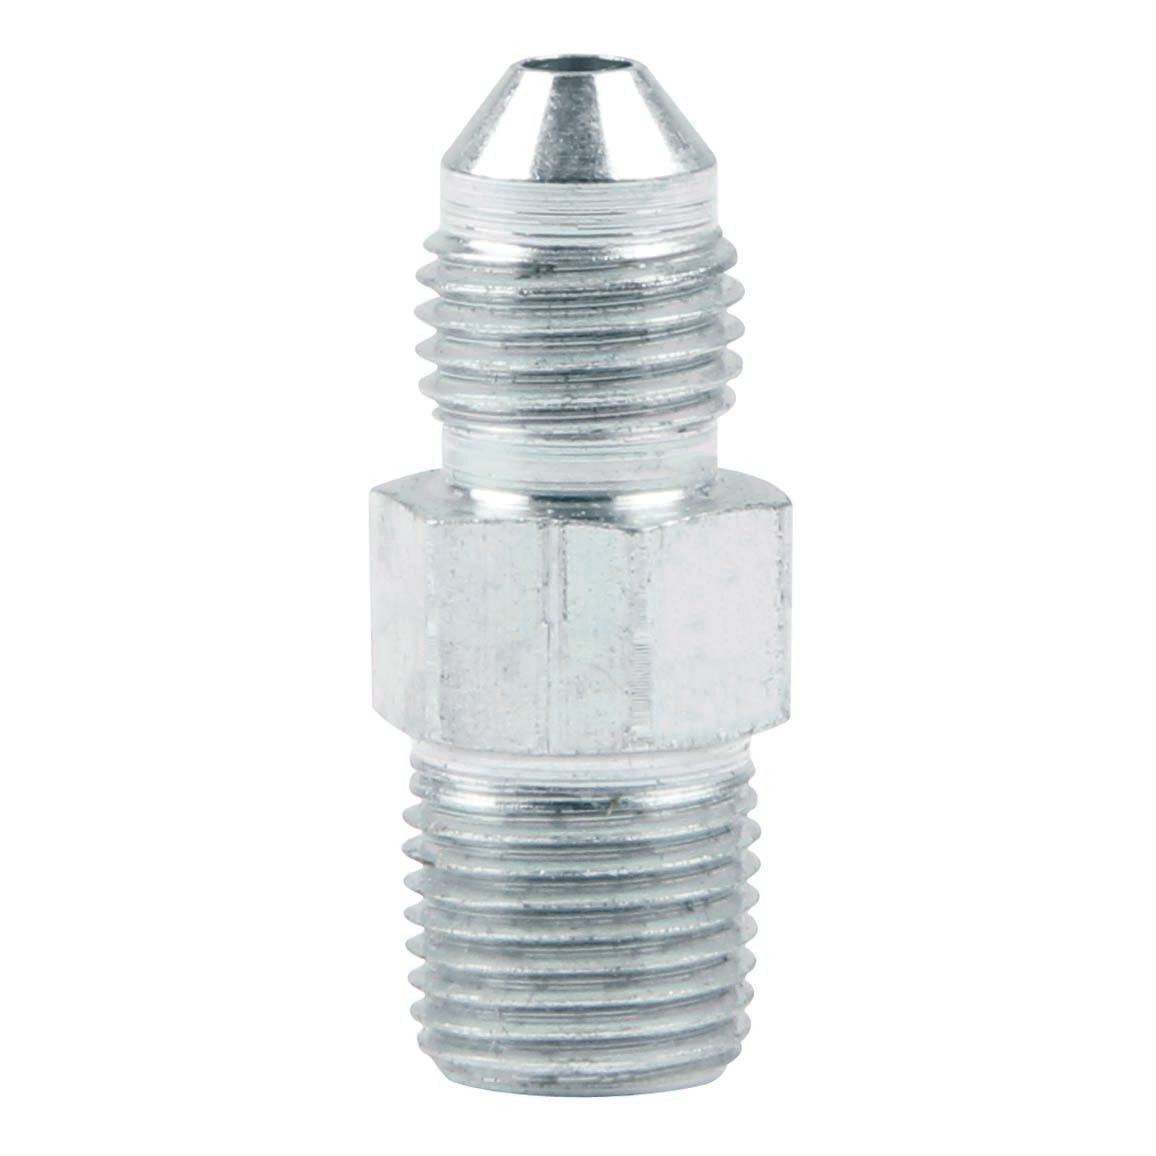 Adapter Fittings -3 to 1/8 NPT 50pk